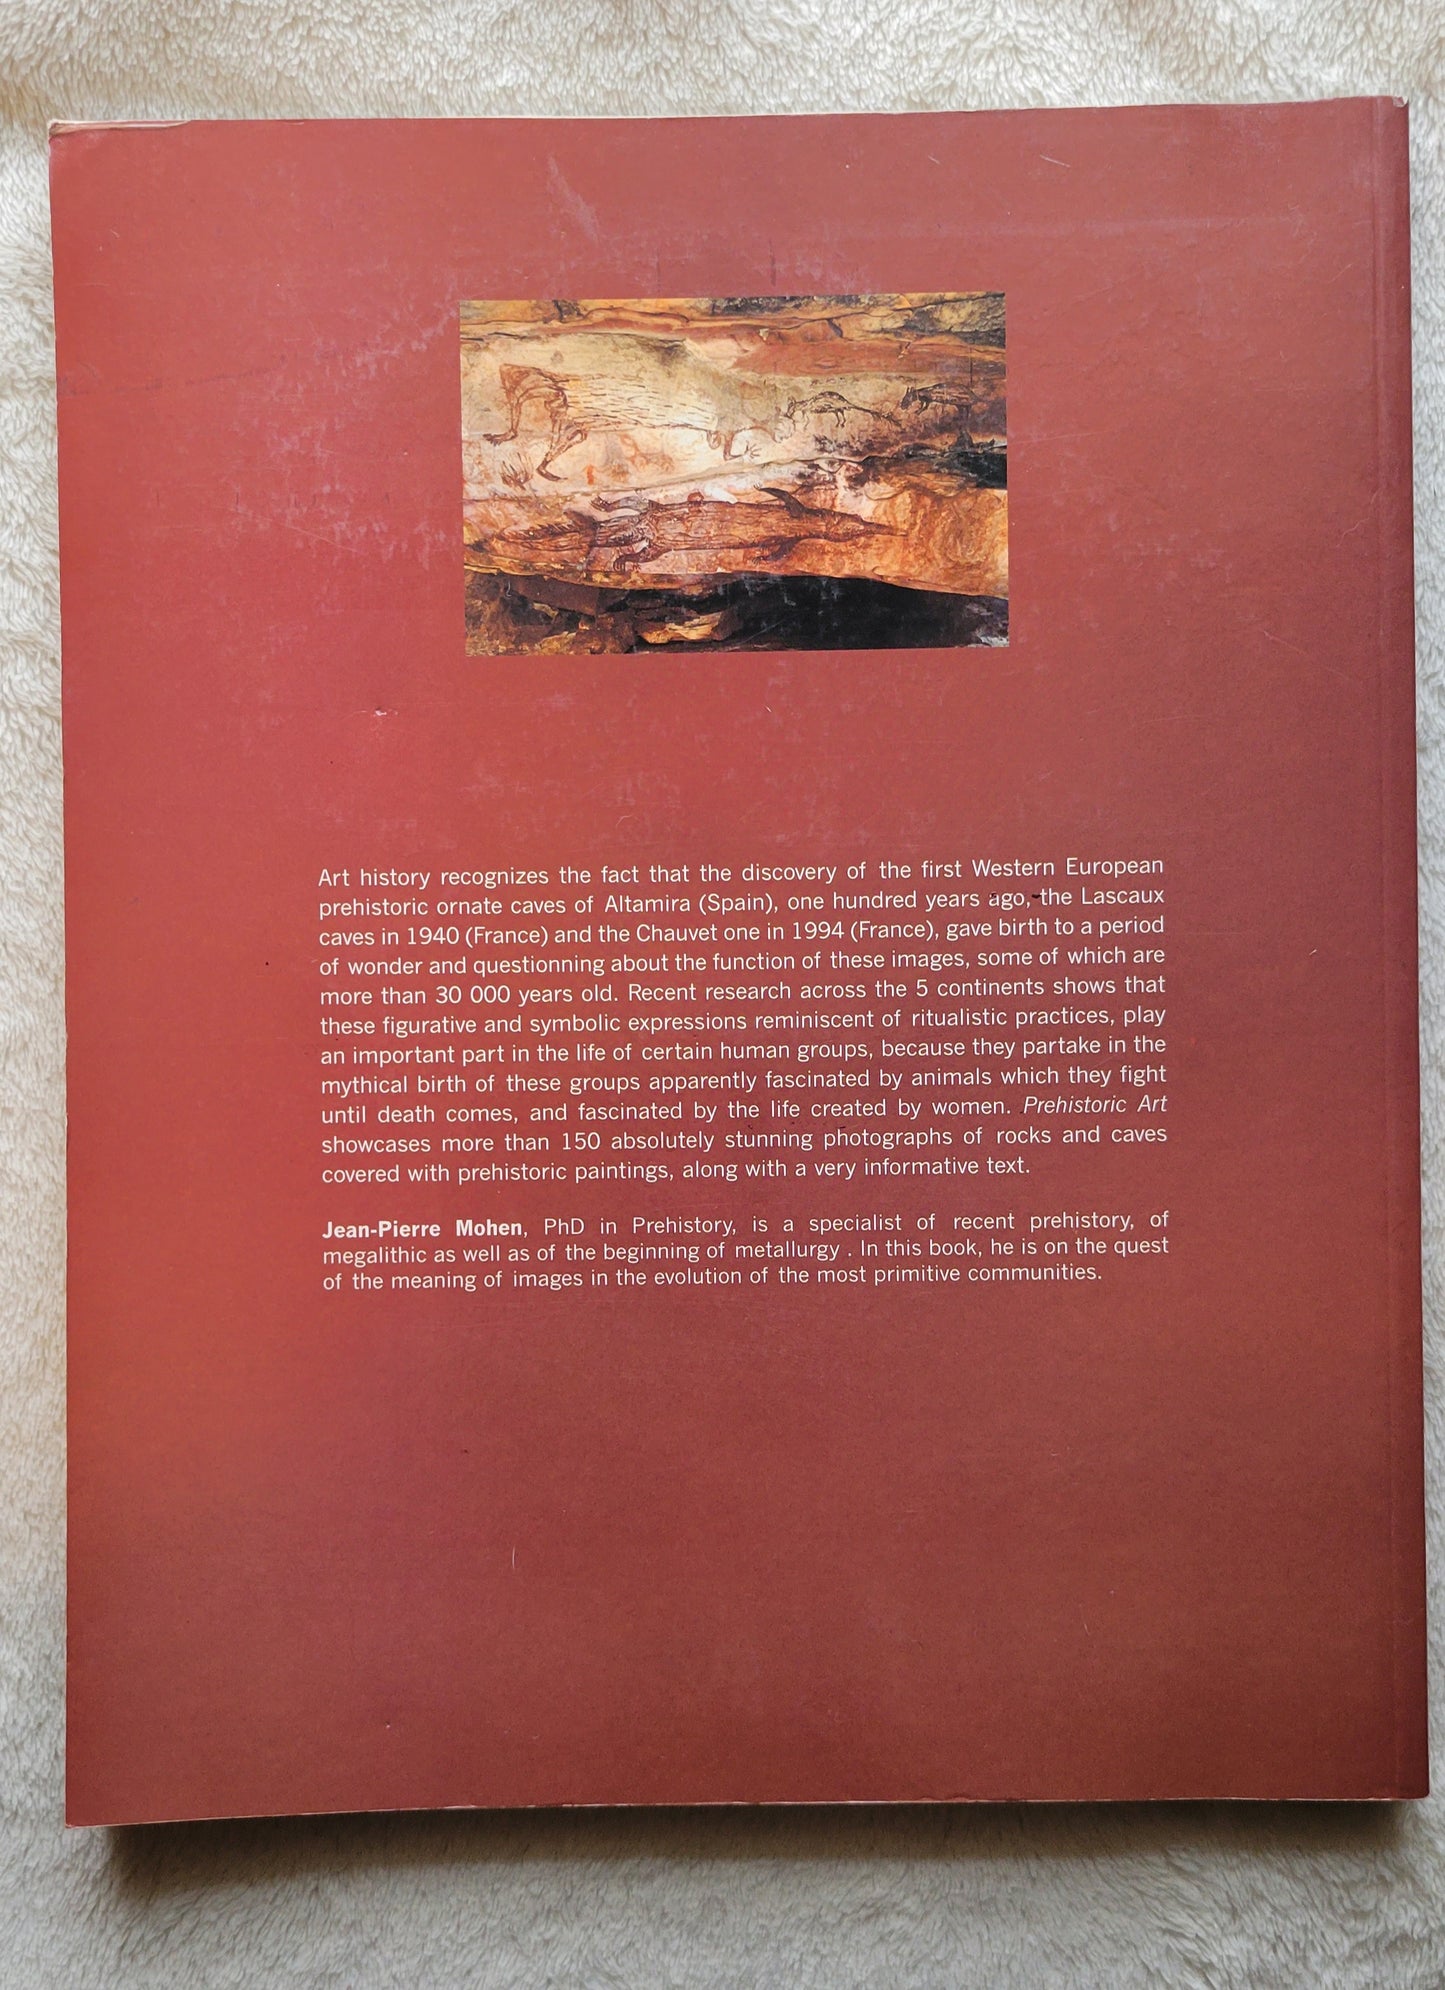 Used book for sale, "Prehistoric Art" was written by Dr. Jean-Pierre Mohen, published by Finest S.A. / Editions. View of back cover.